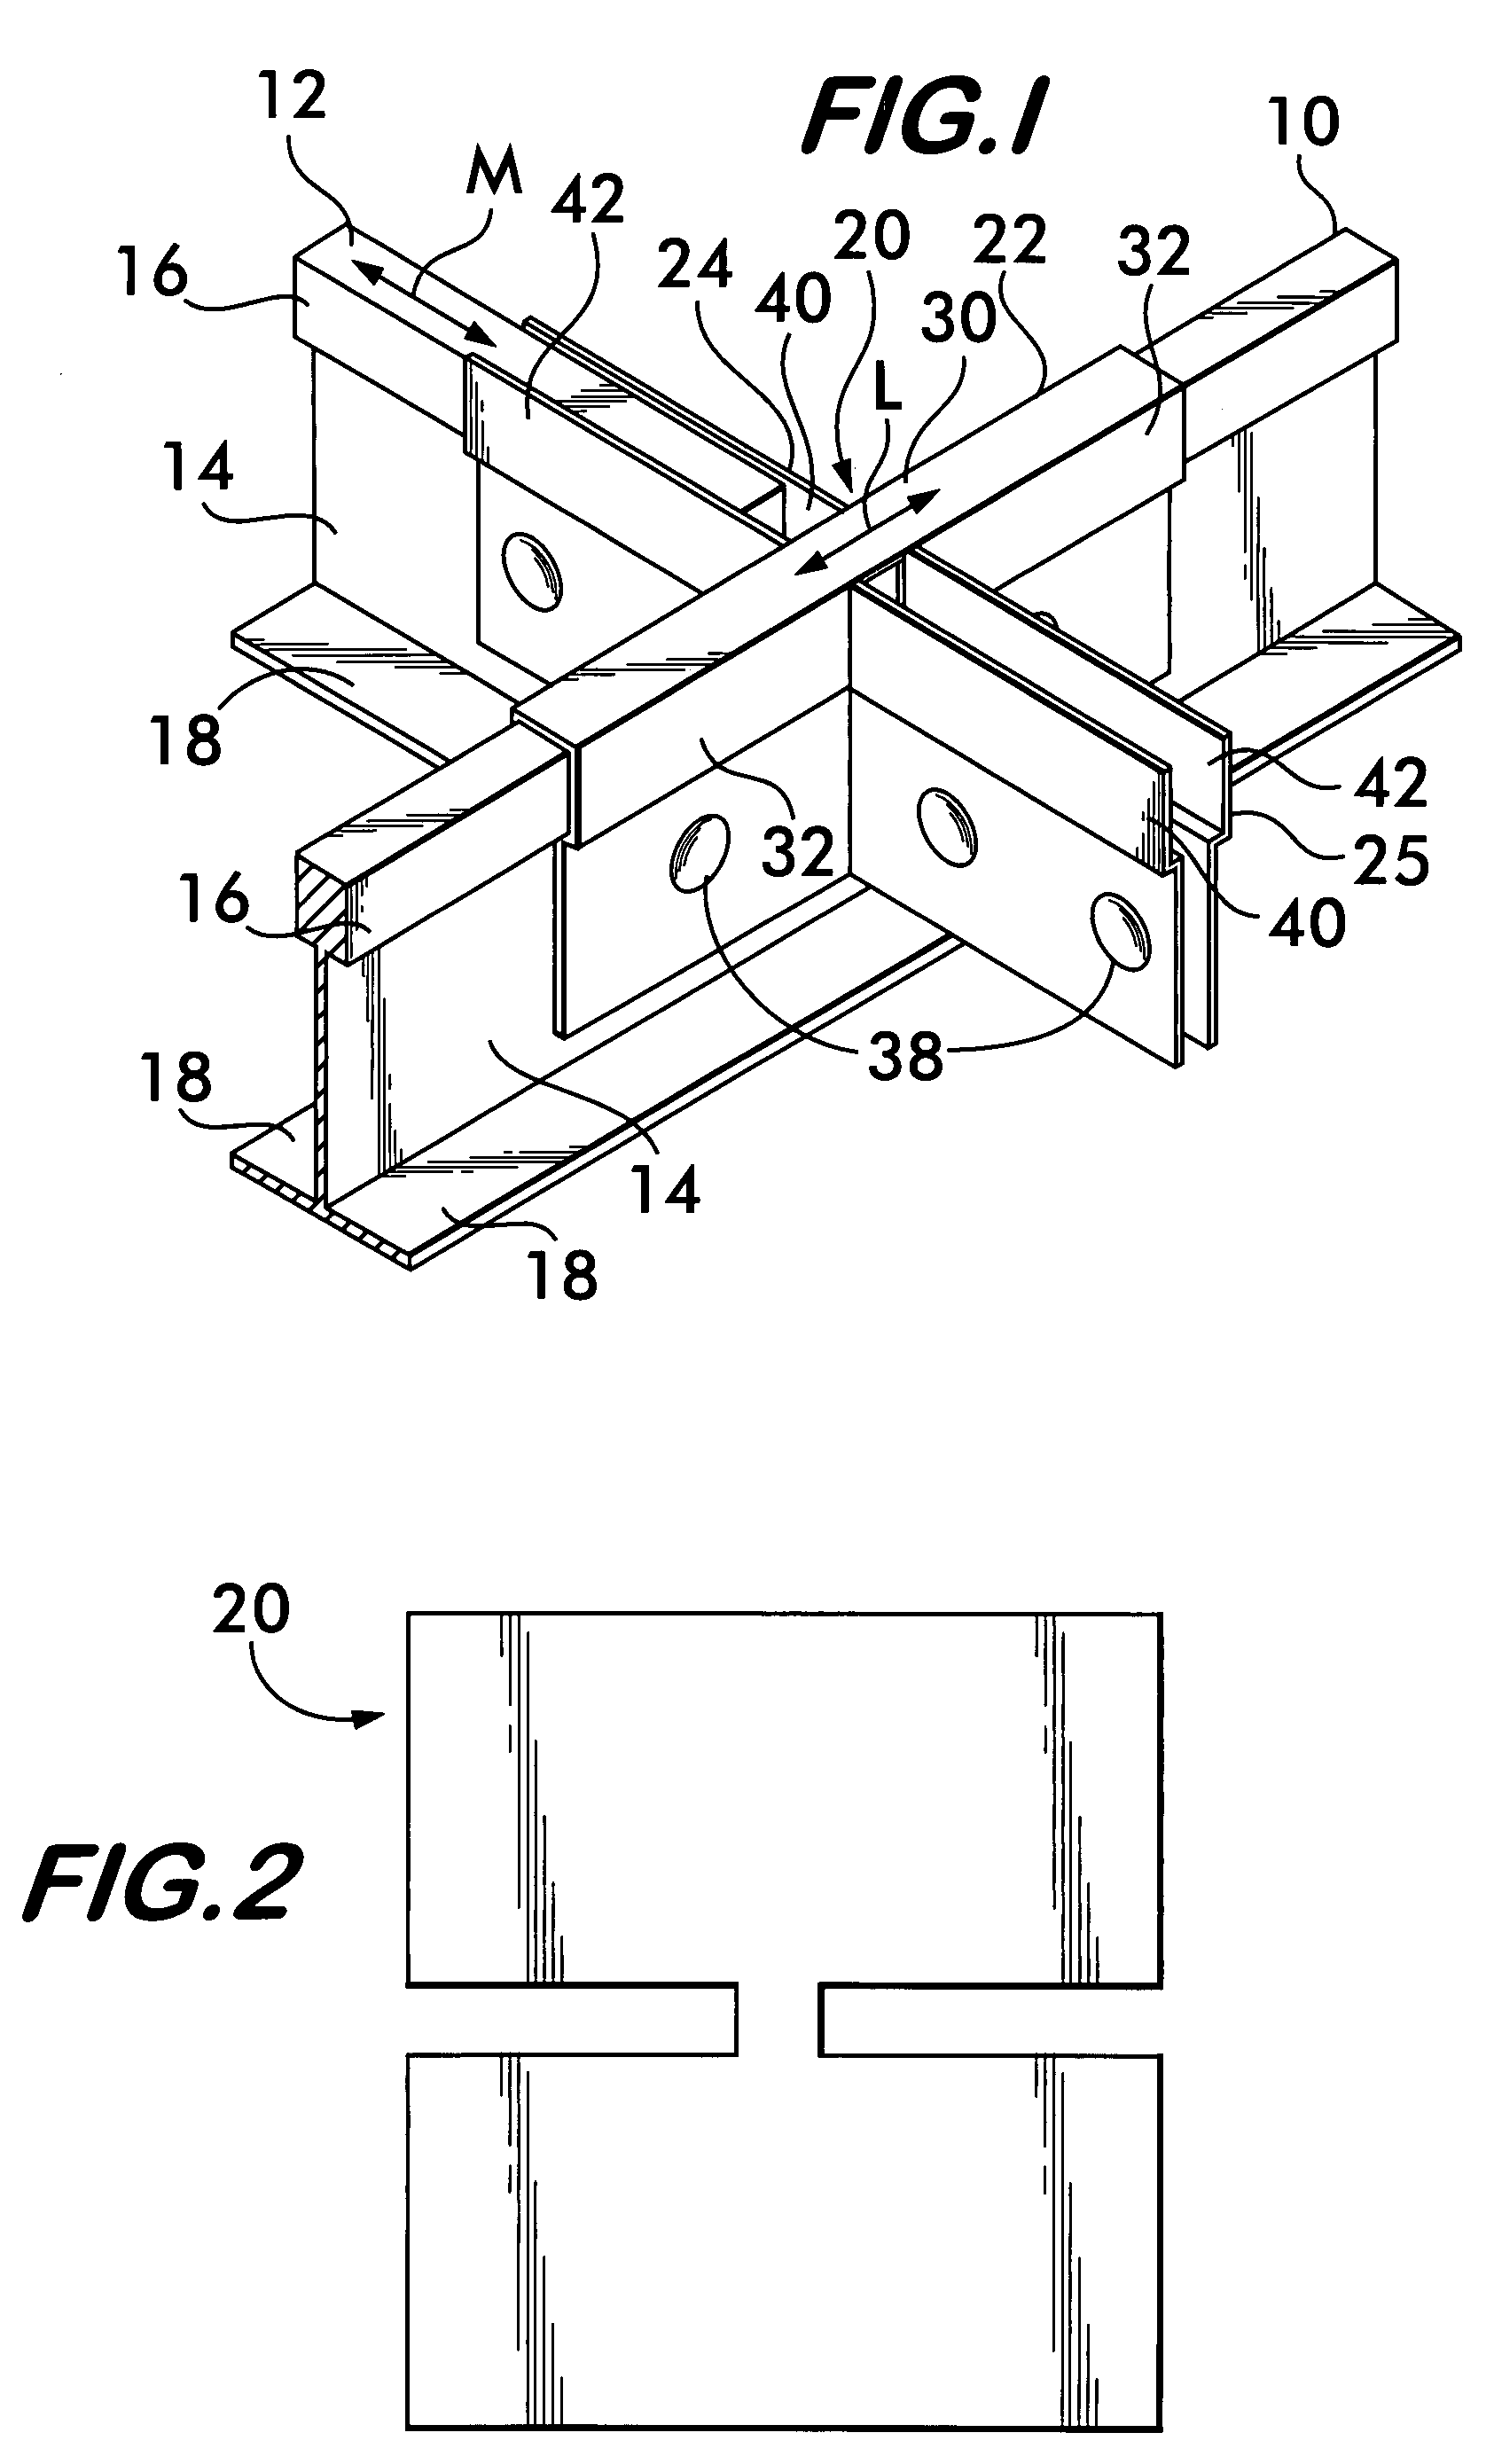 Suspended ceiling grid network utilizing seismic separation joint clips